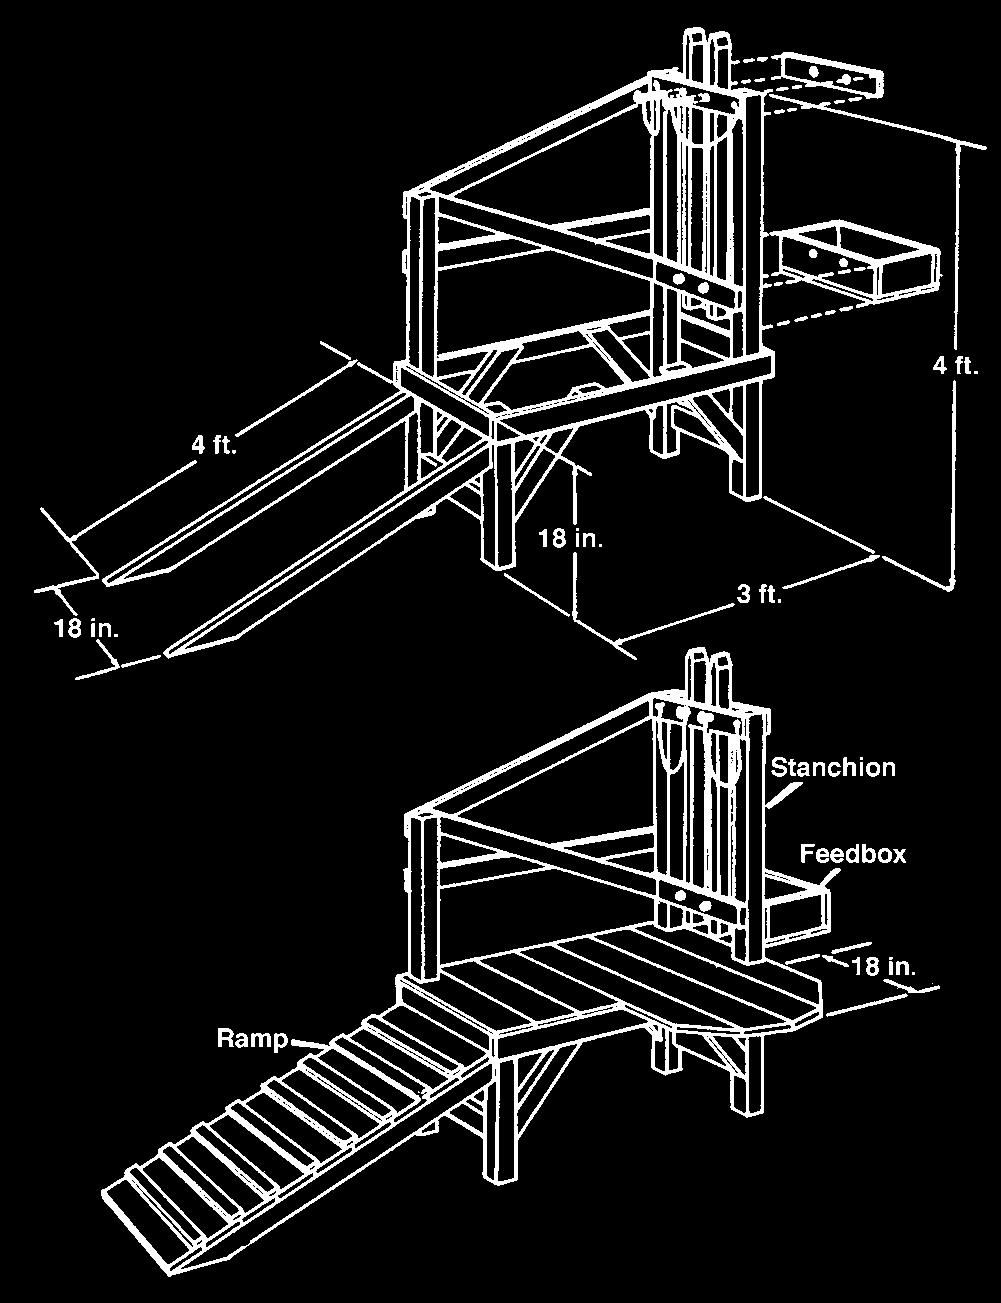 Figure 6. Goat milking stand showing stanchion, feedbox, railing, and ramp.